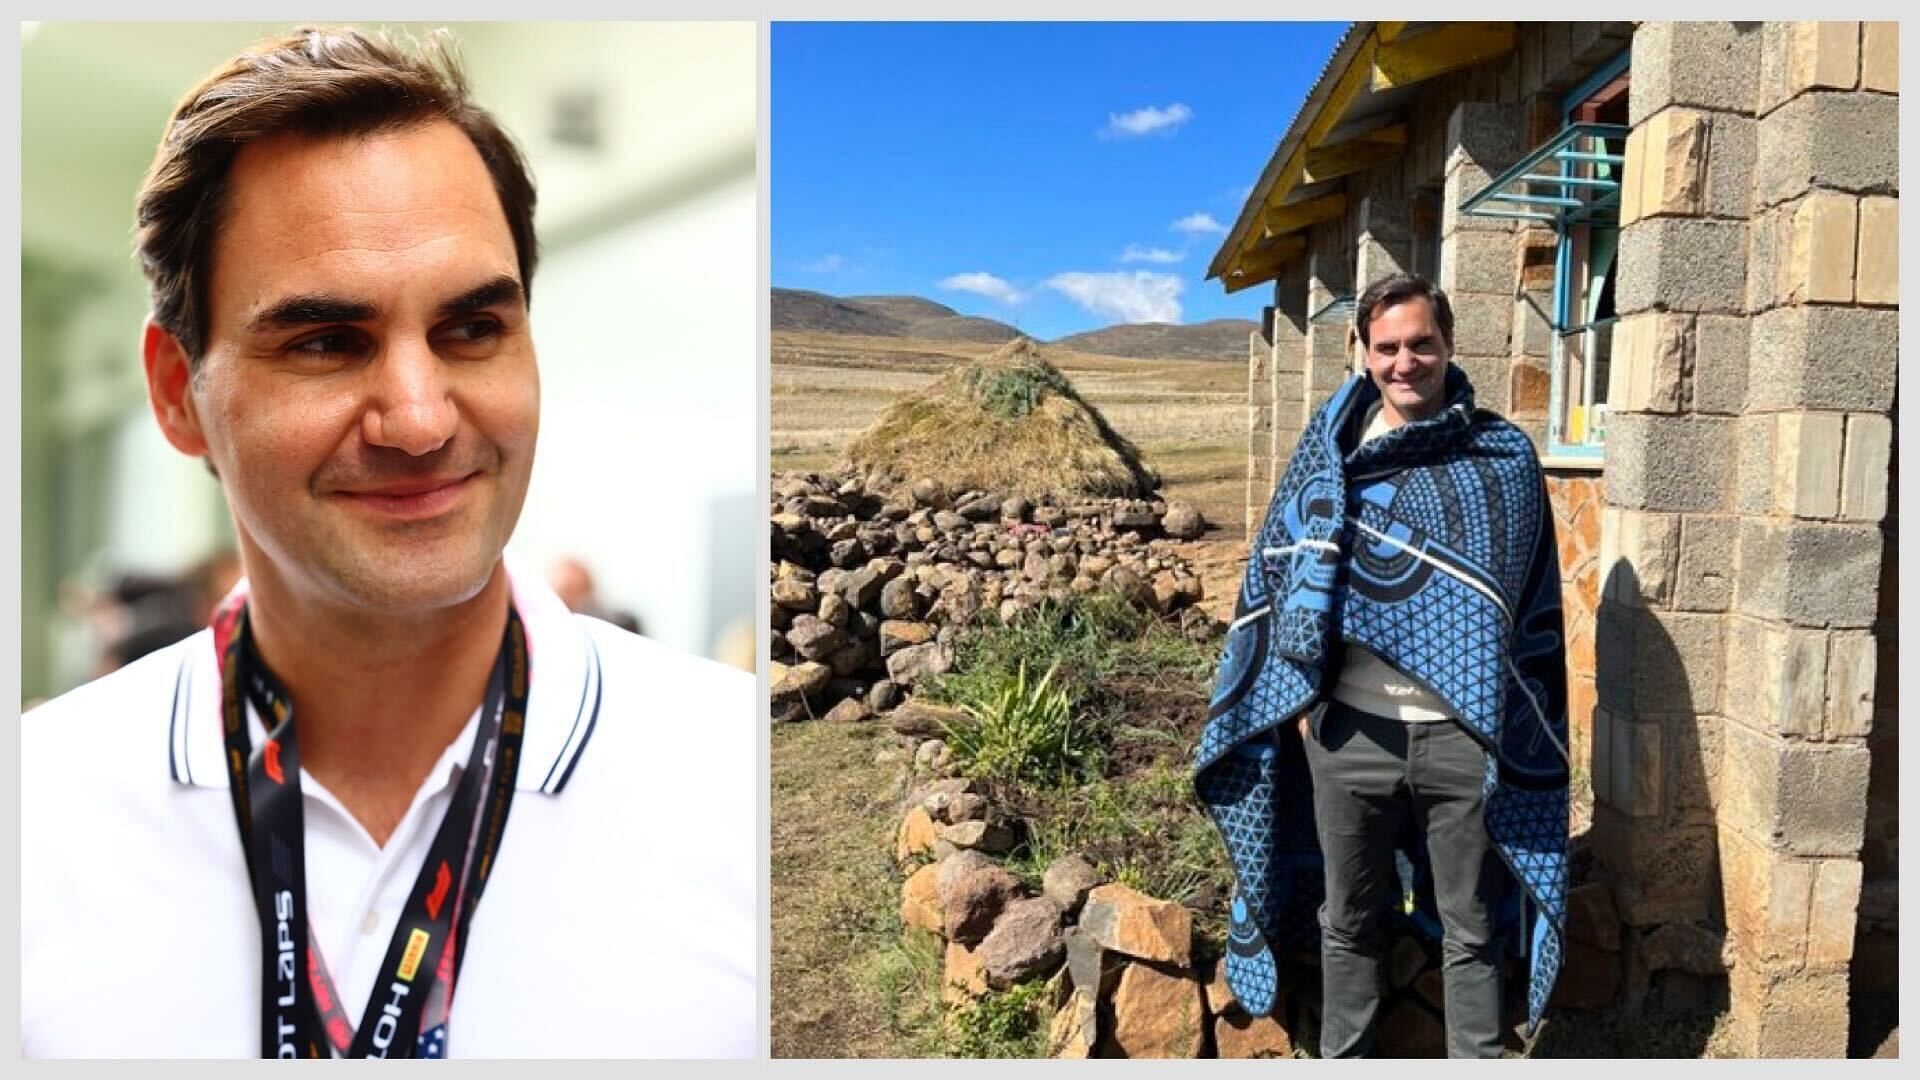 Roger Federer on his visit to Lesotho for his foundation